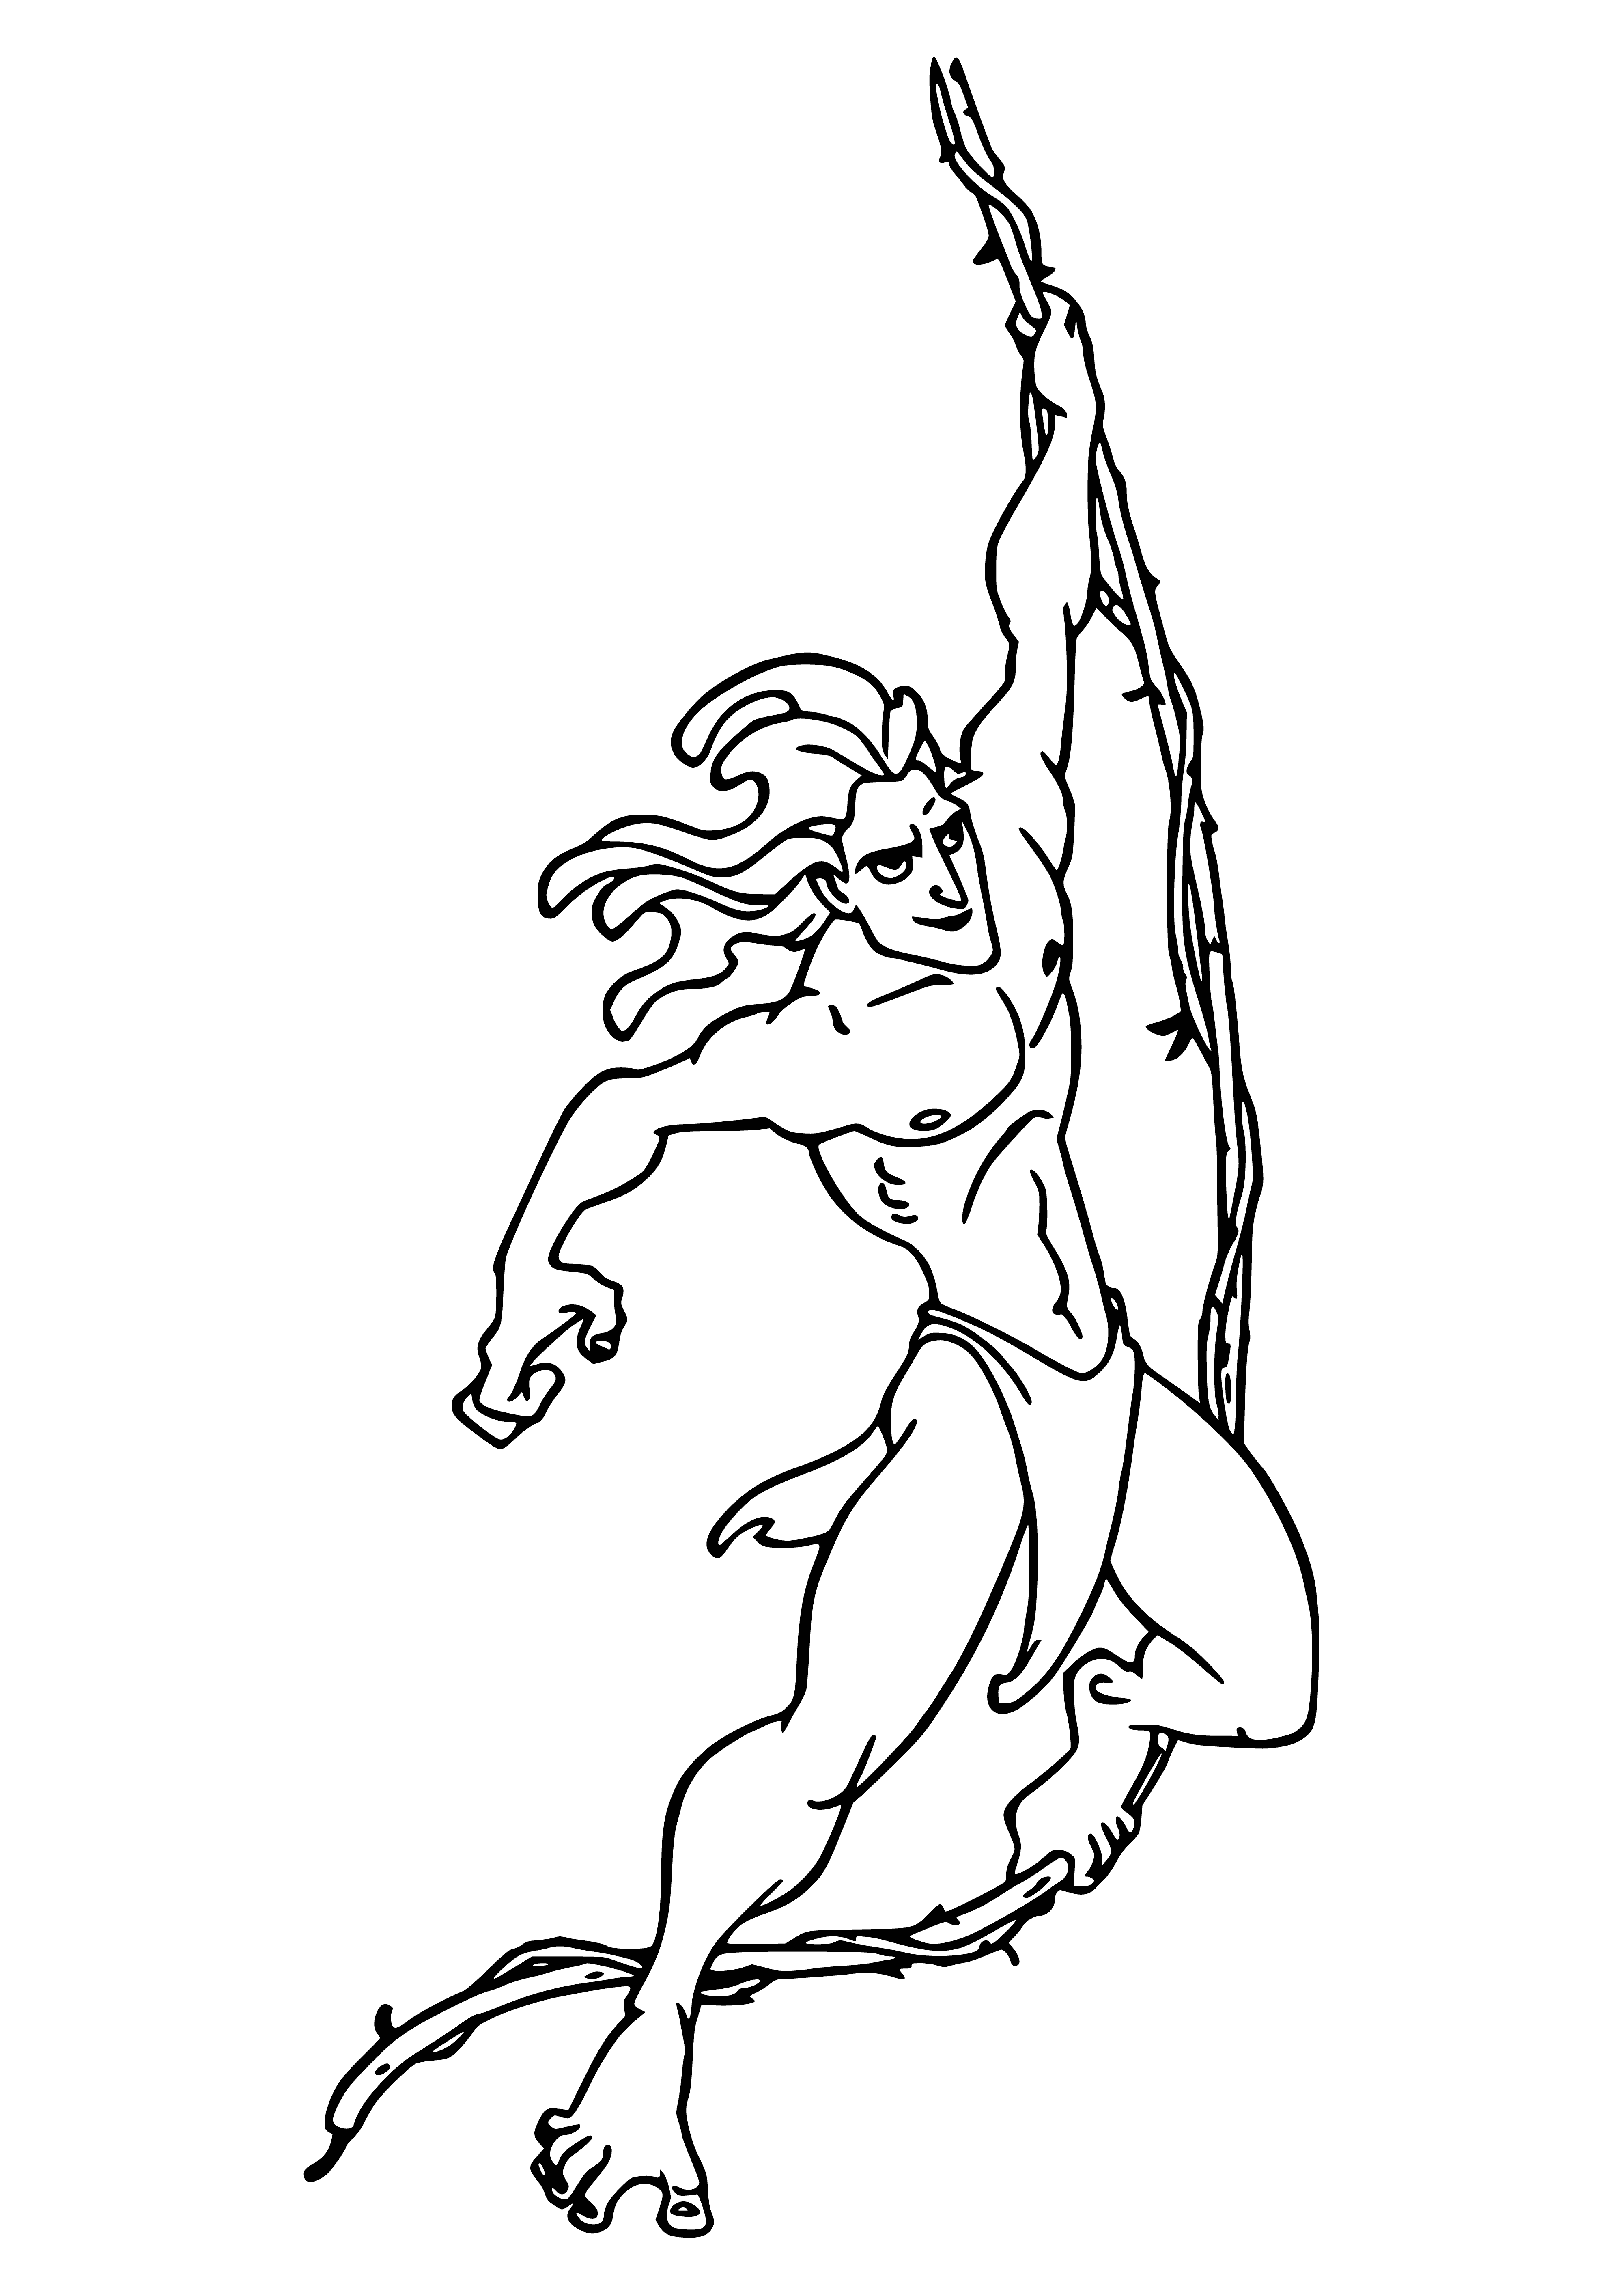 coloring page: A Tarzan-like character swings confidently above the jungle, looking out at the viewer.